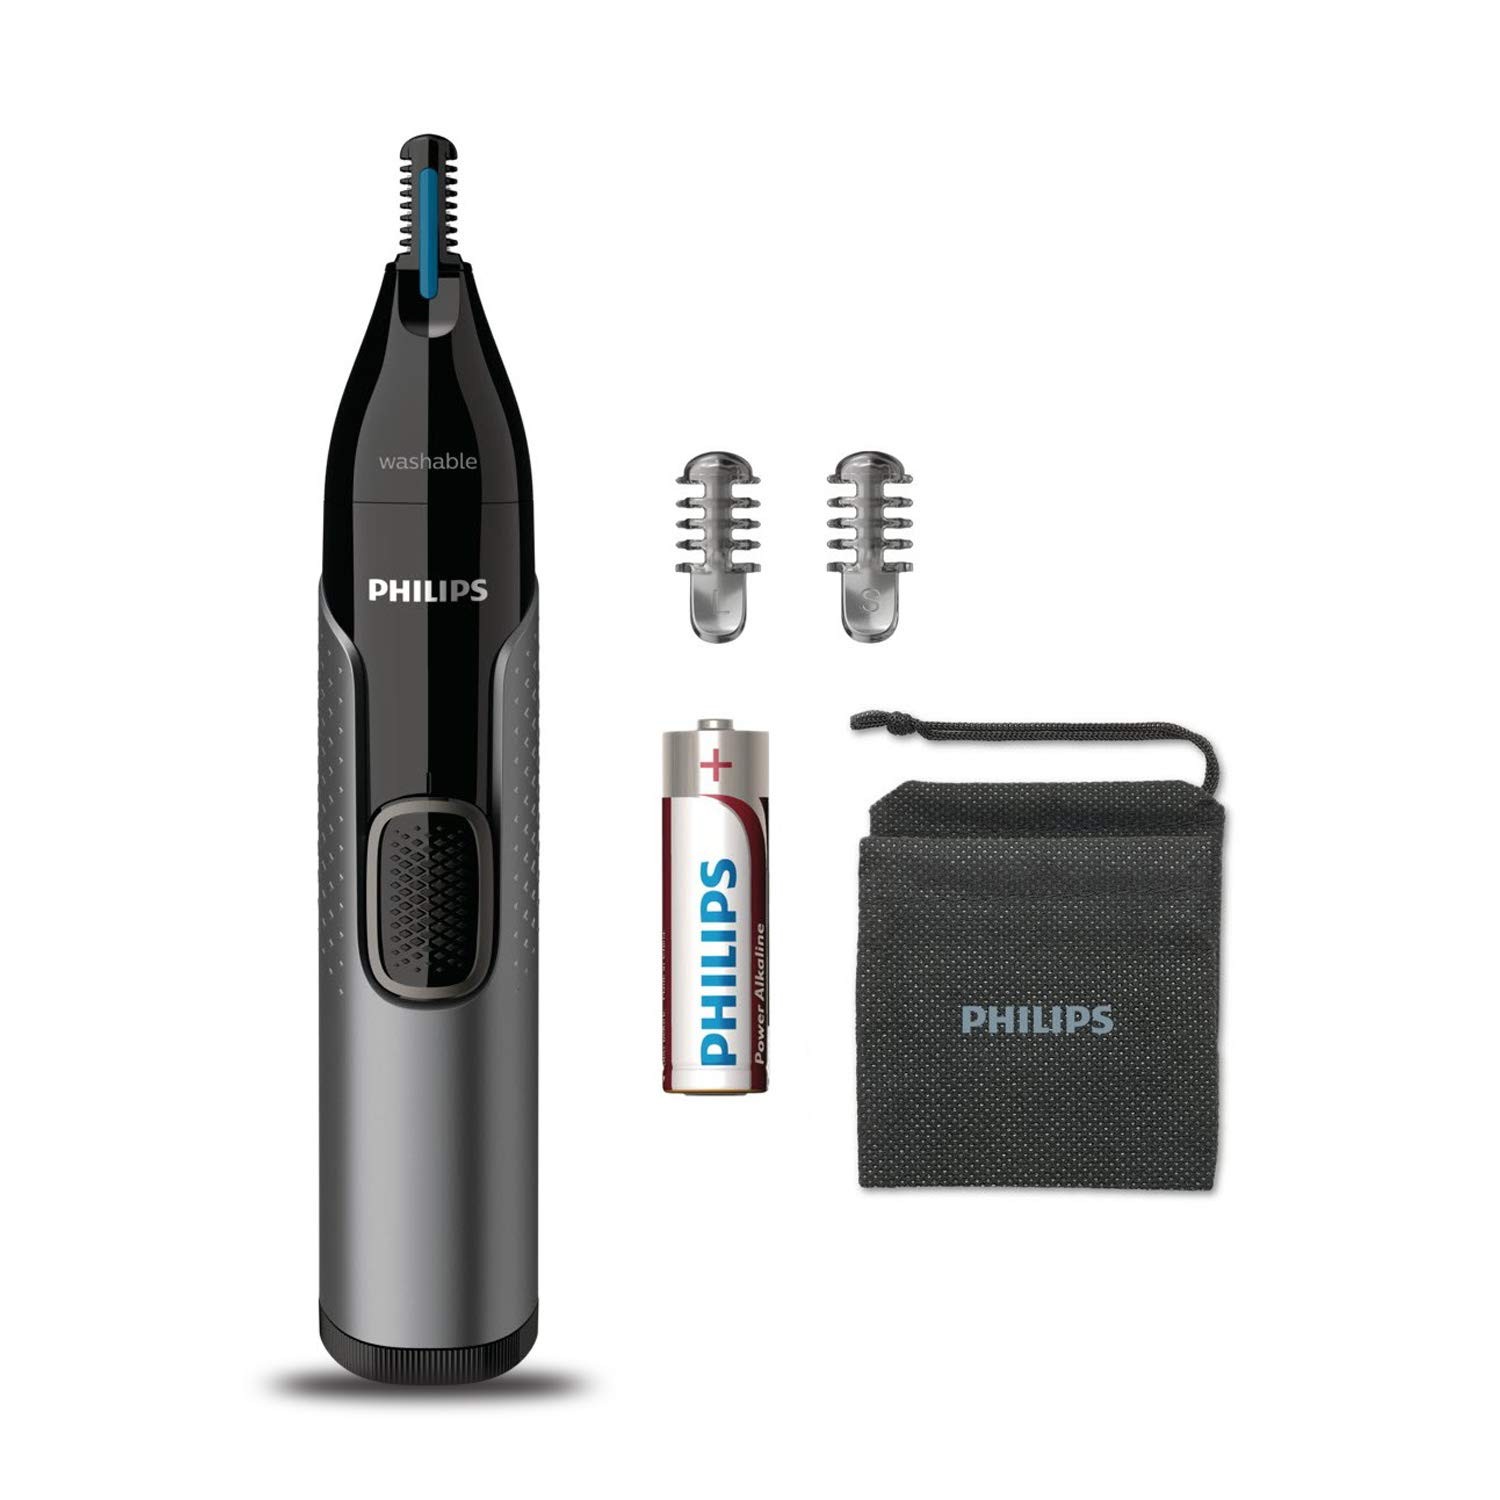 Philips Nose Trimmer Nt3650/16, Cordless Nose, Ear & Eyebrow Trimmer with Protective Guard System